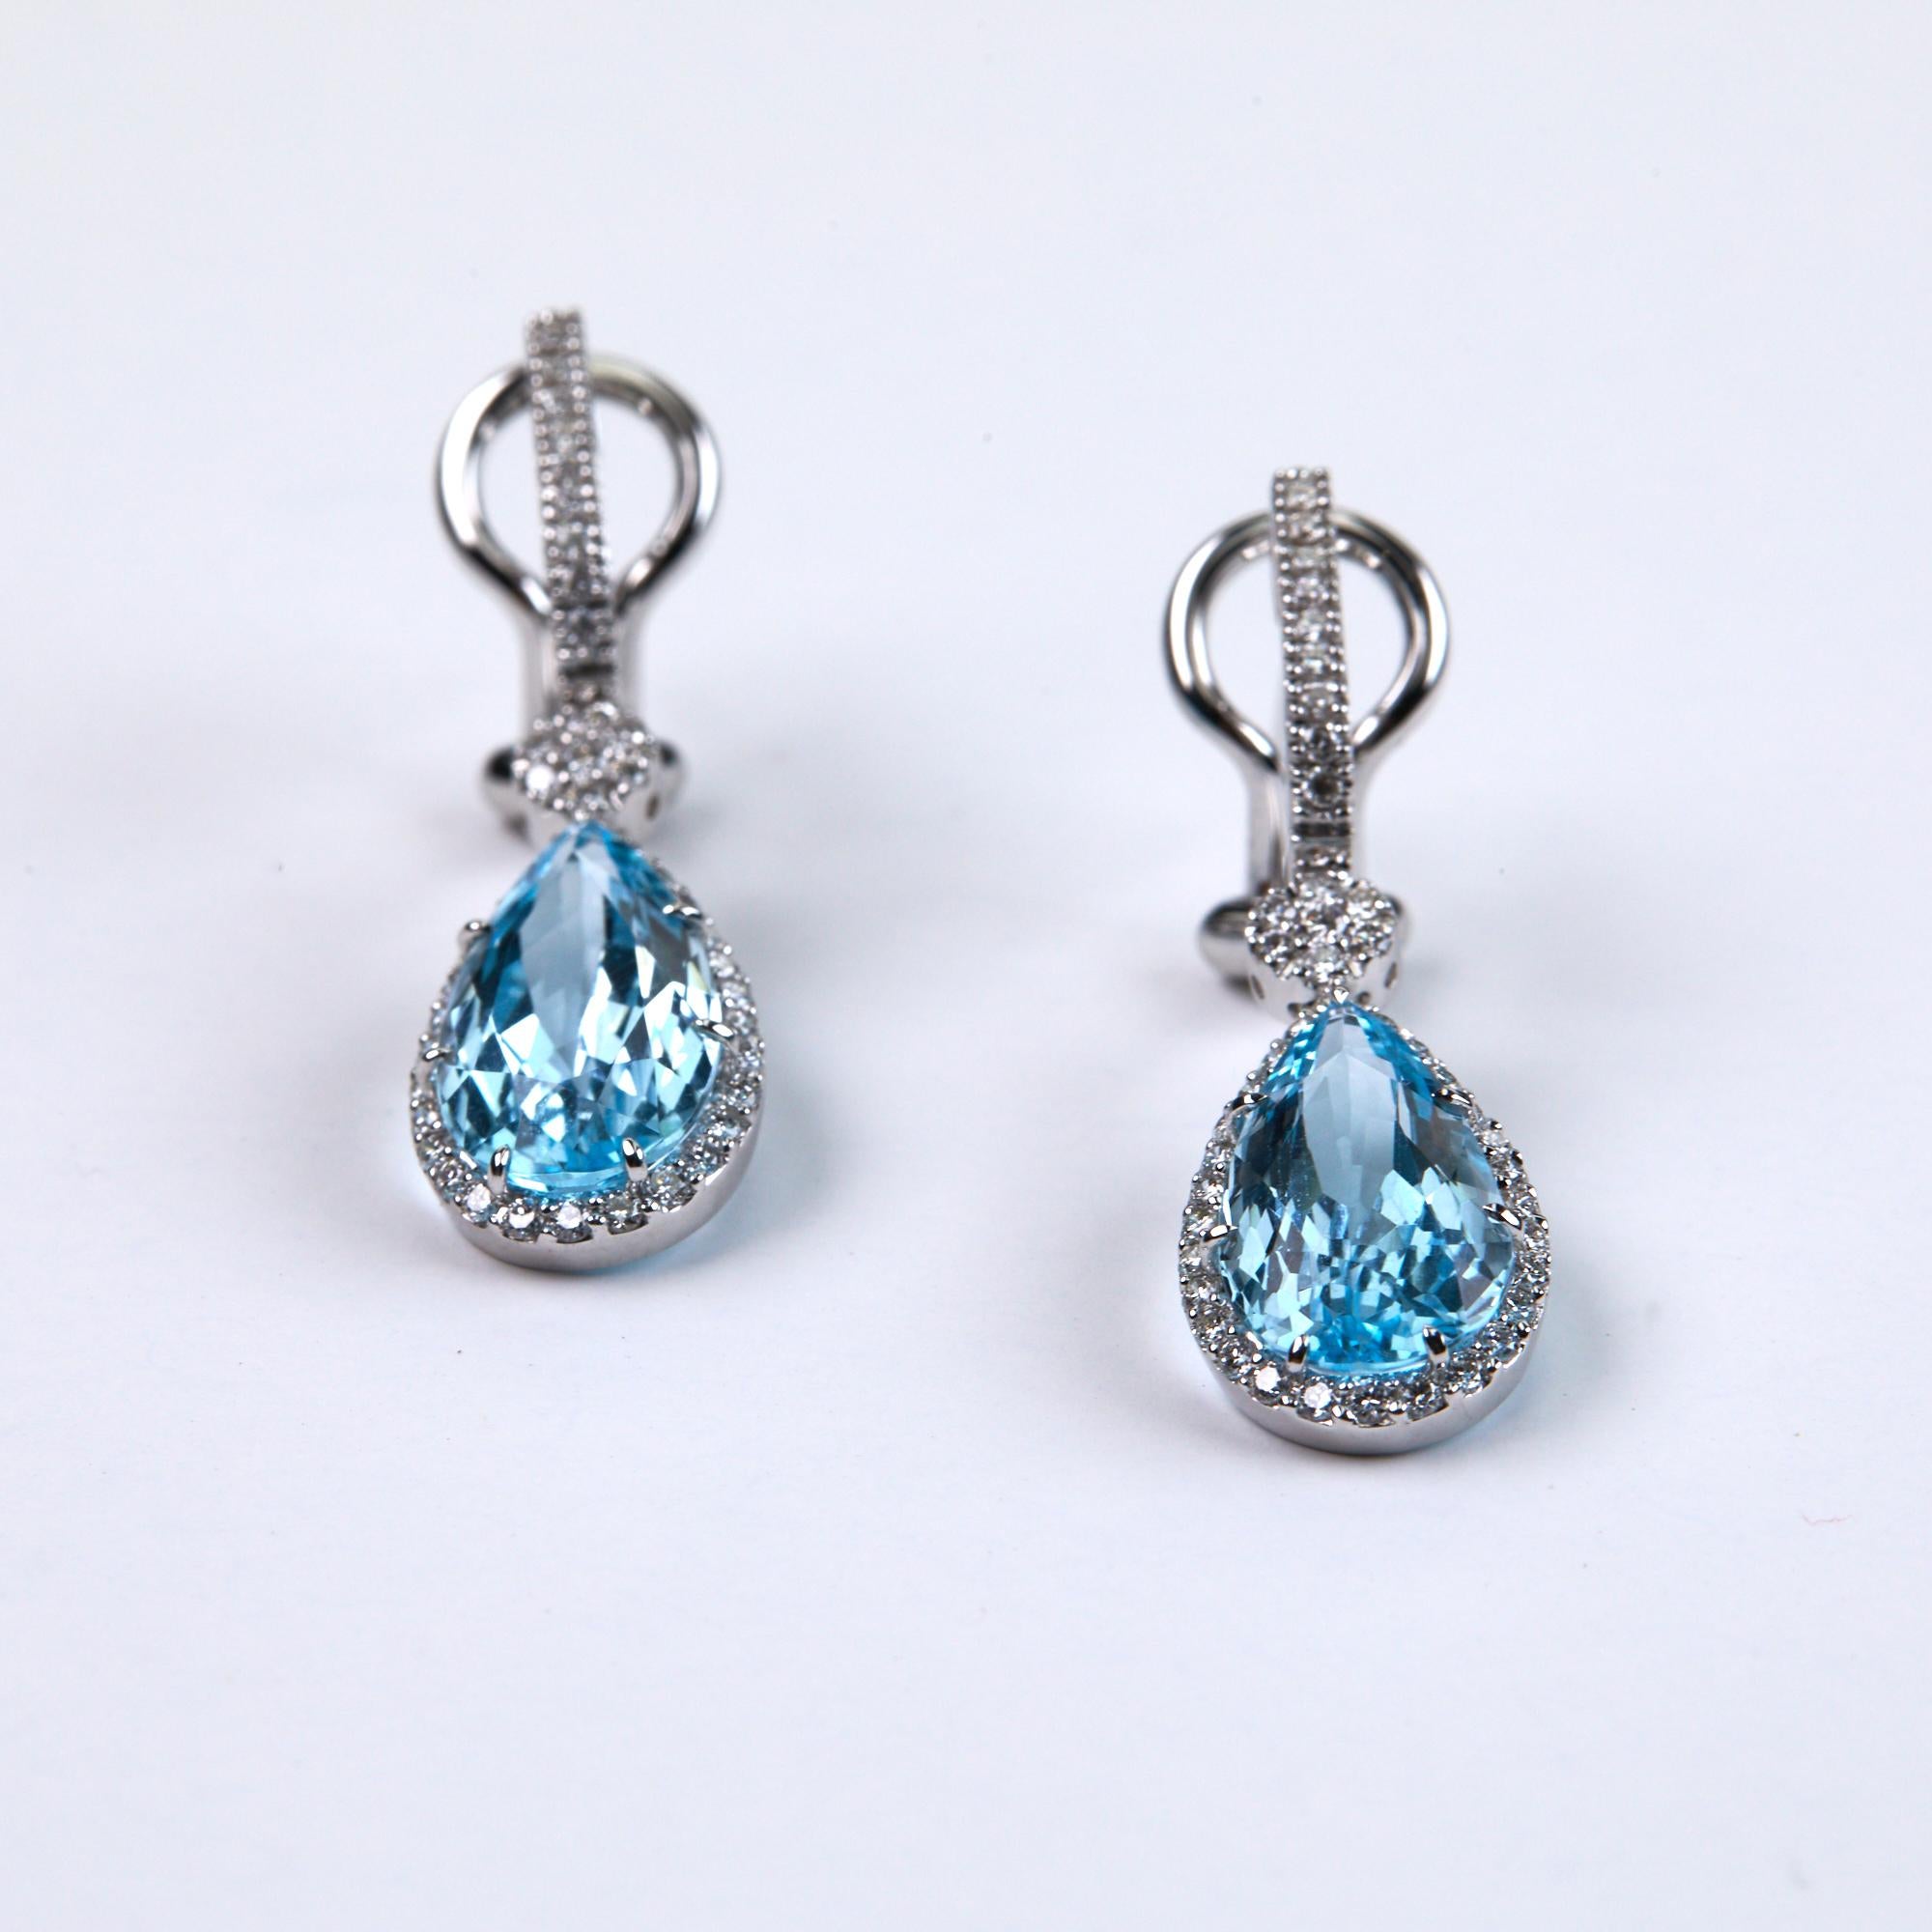 Blue Topaz And Diamond Dangle Earrings beautifully worn for day or evening.  Two Pear Shaped Blue Topaz stones weighing 8.94 carats and an additional .67 carats of brilliant round cut diamonds make these exceptional drop earrings.  The diamonds make